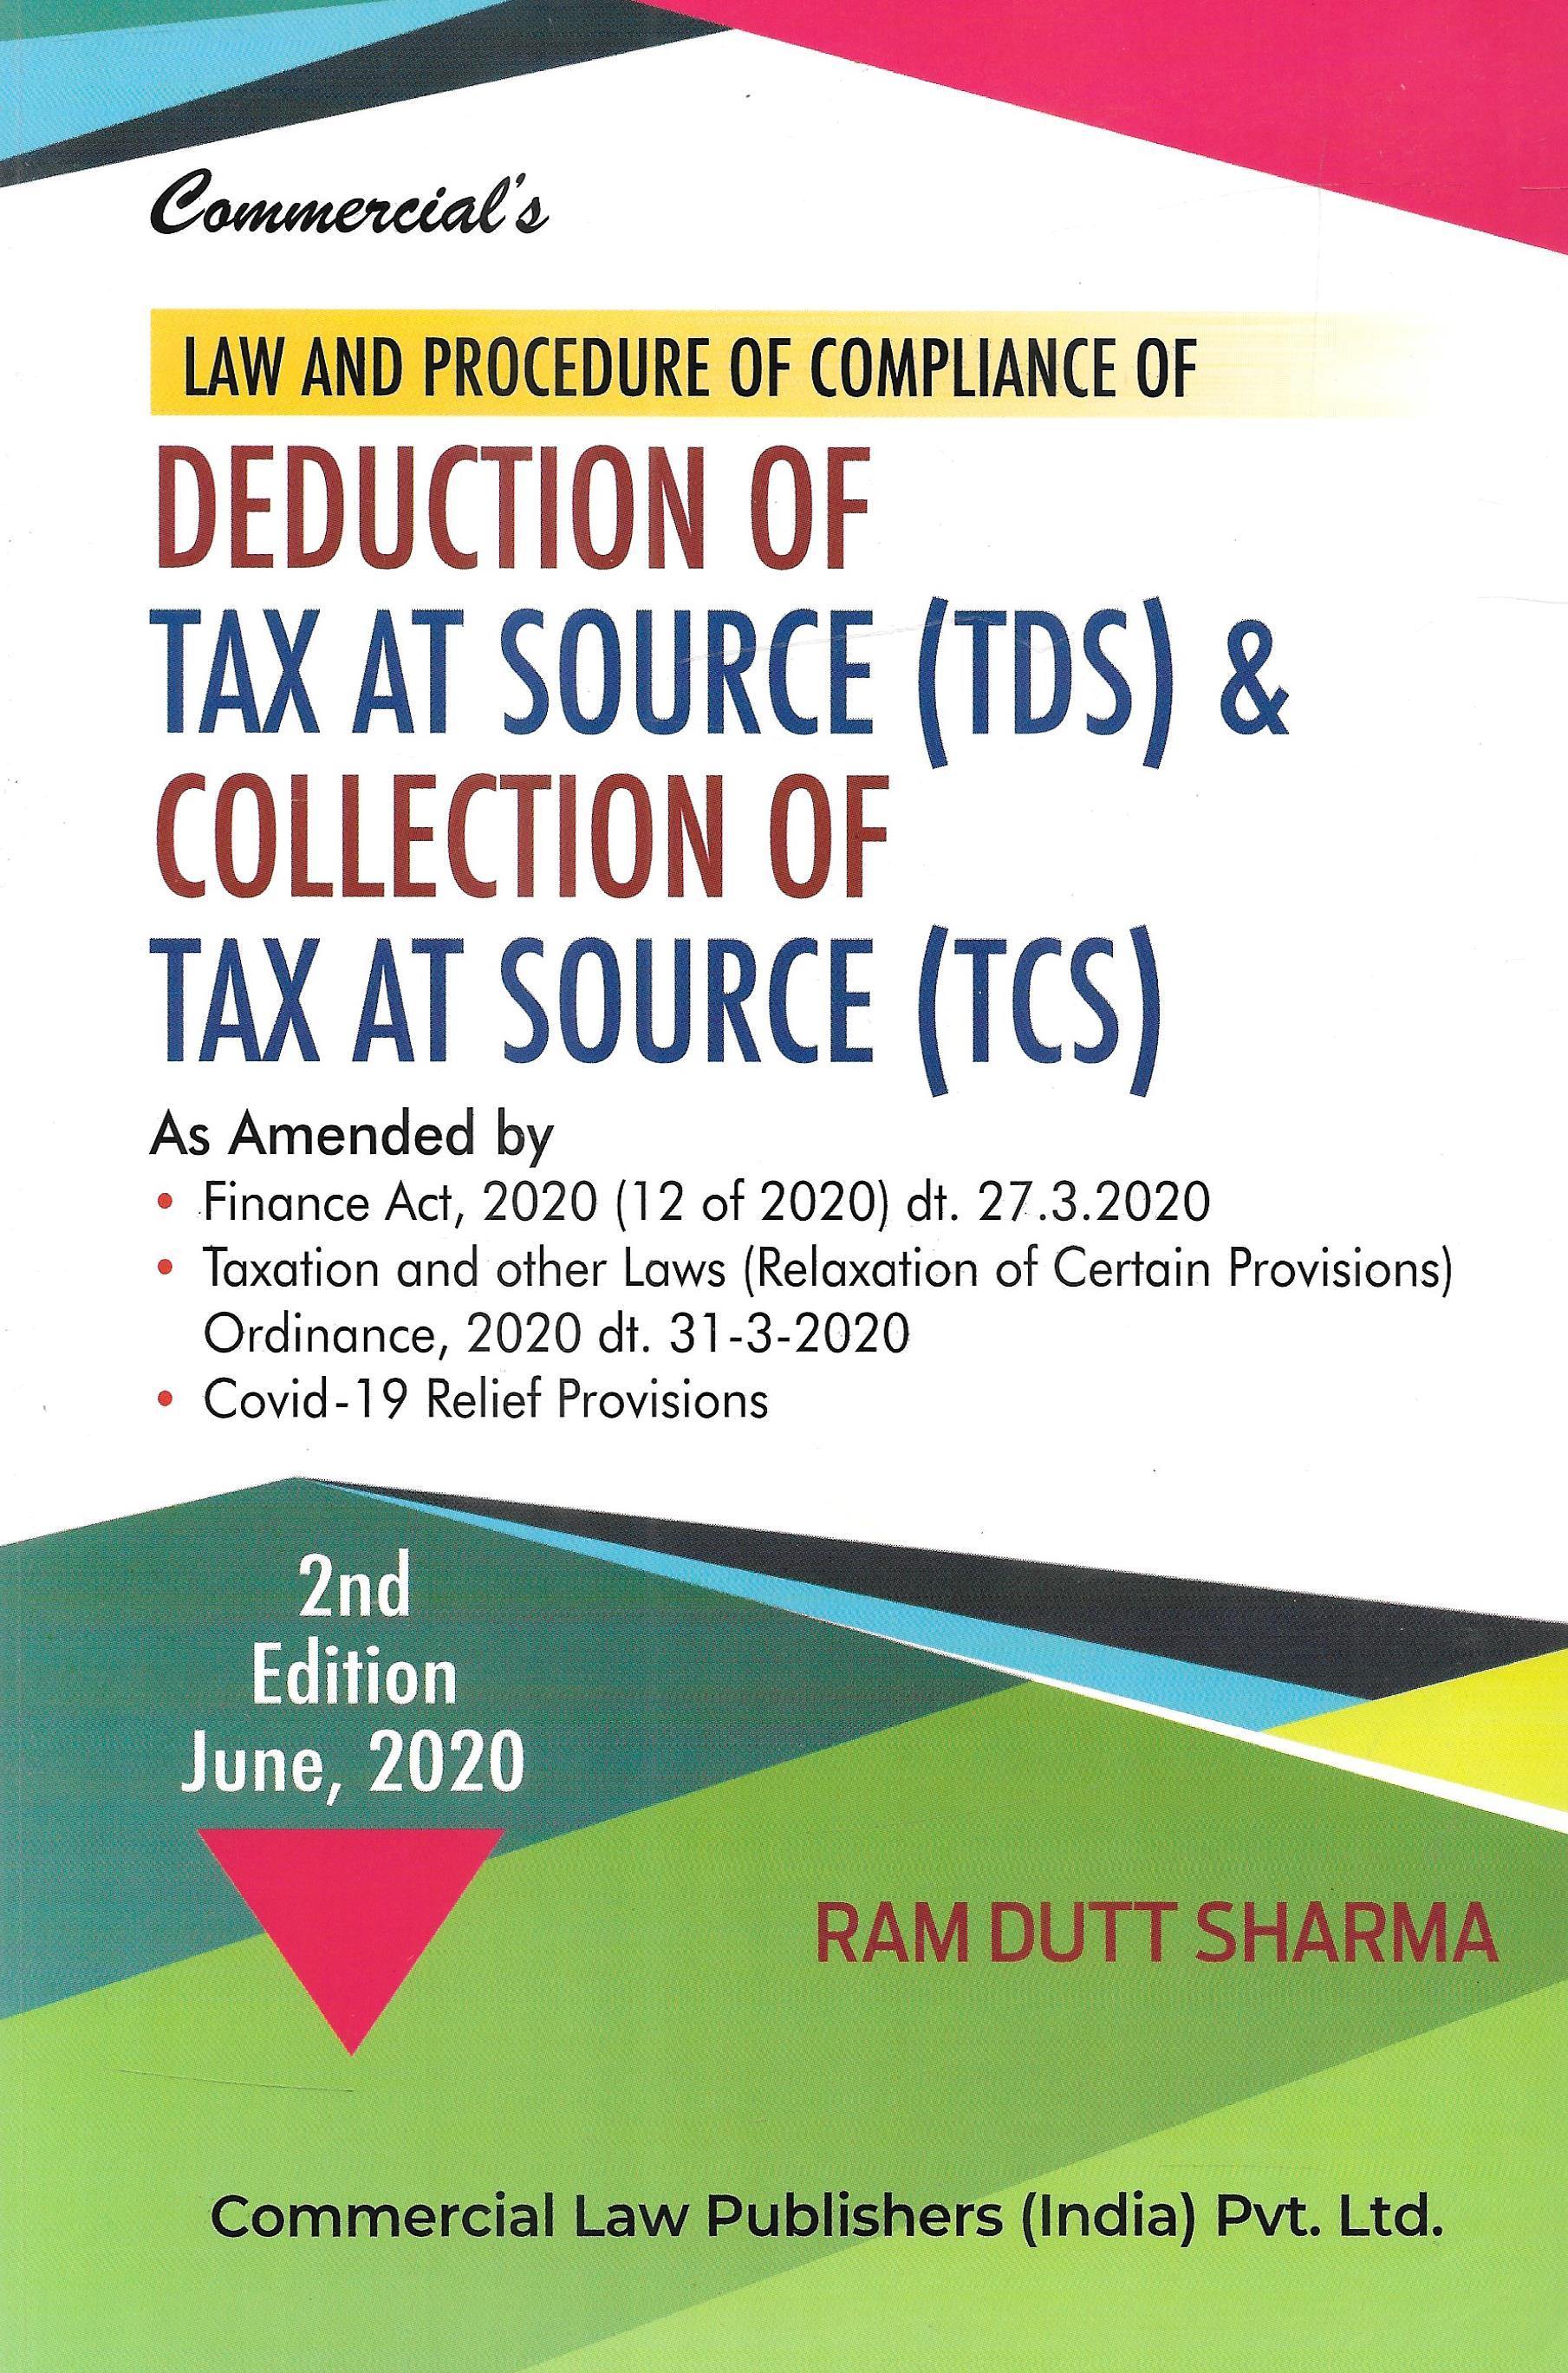 Law and Procedure of Compliance of Deduction of Tax at Source (TDS) & Collection of Tax at Source (TCS) - M&J Services